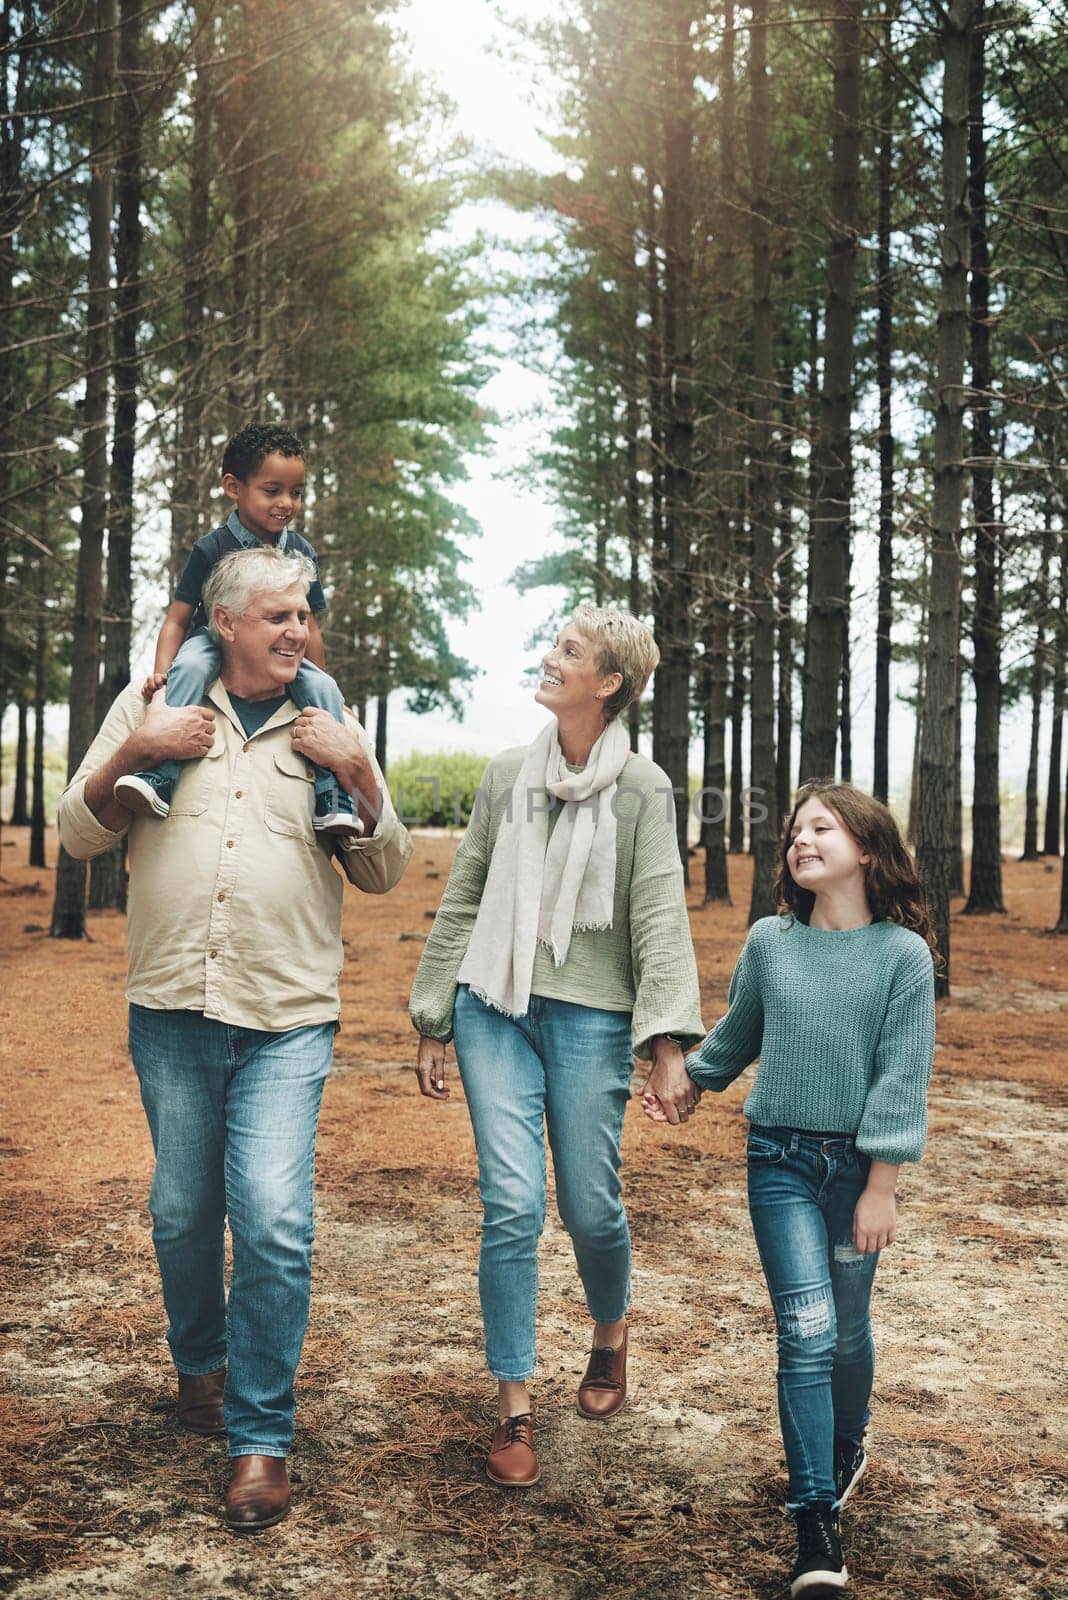 Family, grandparents and children in forest adventure together for quality bonding time in nature. Happy grandpa, grandma and kids enjoying a fun walk, hike or stroll in the woods in the outdoors by YuriArcurs